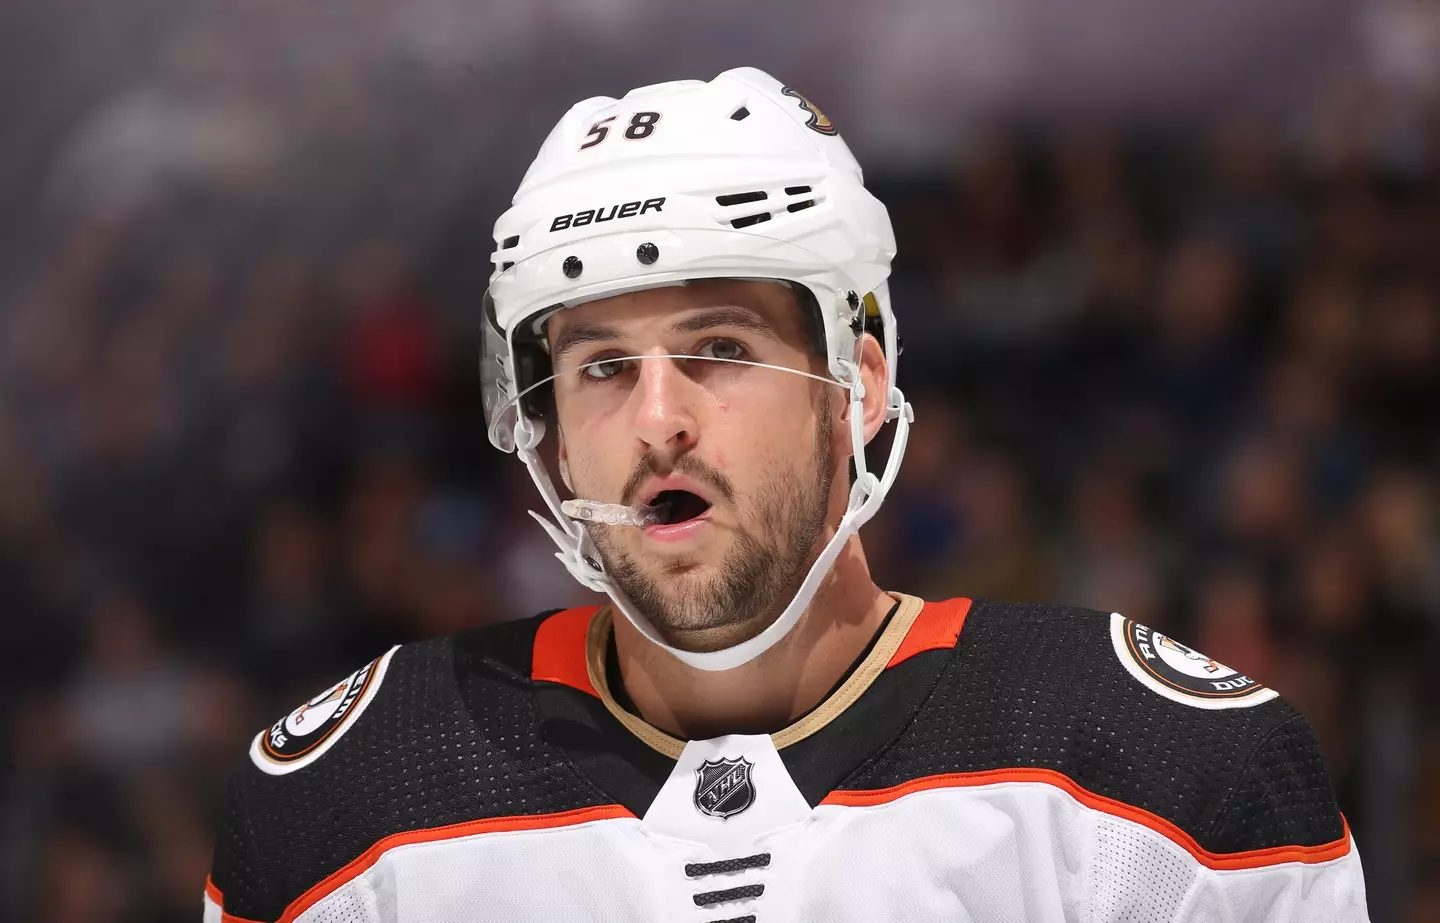 The 29-year-old played for the Anaheim Ducks in the NHL.